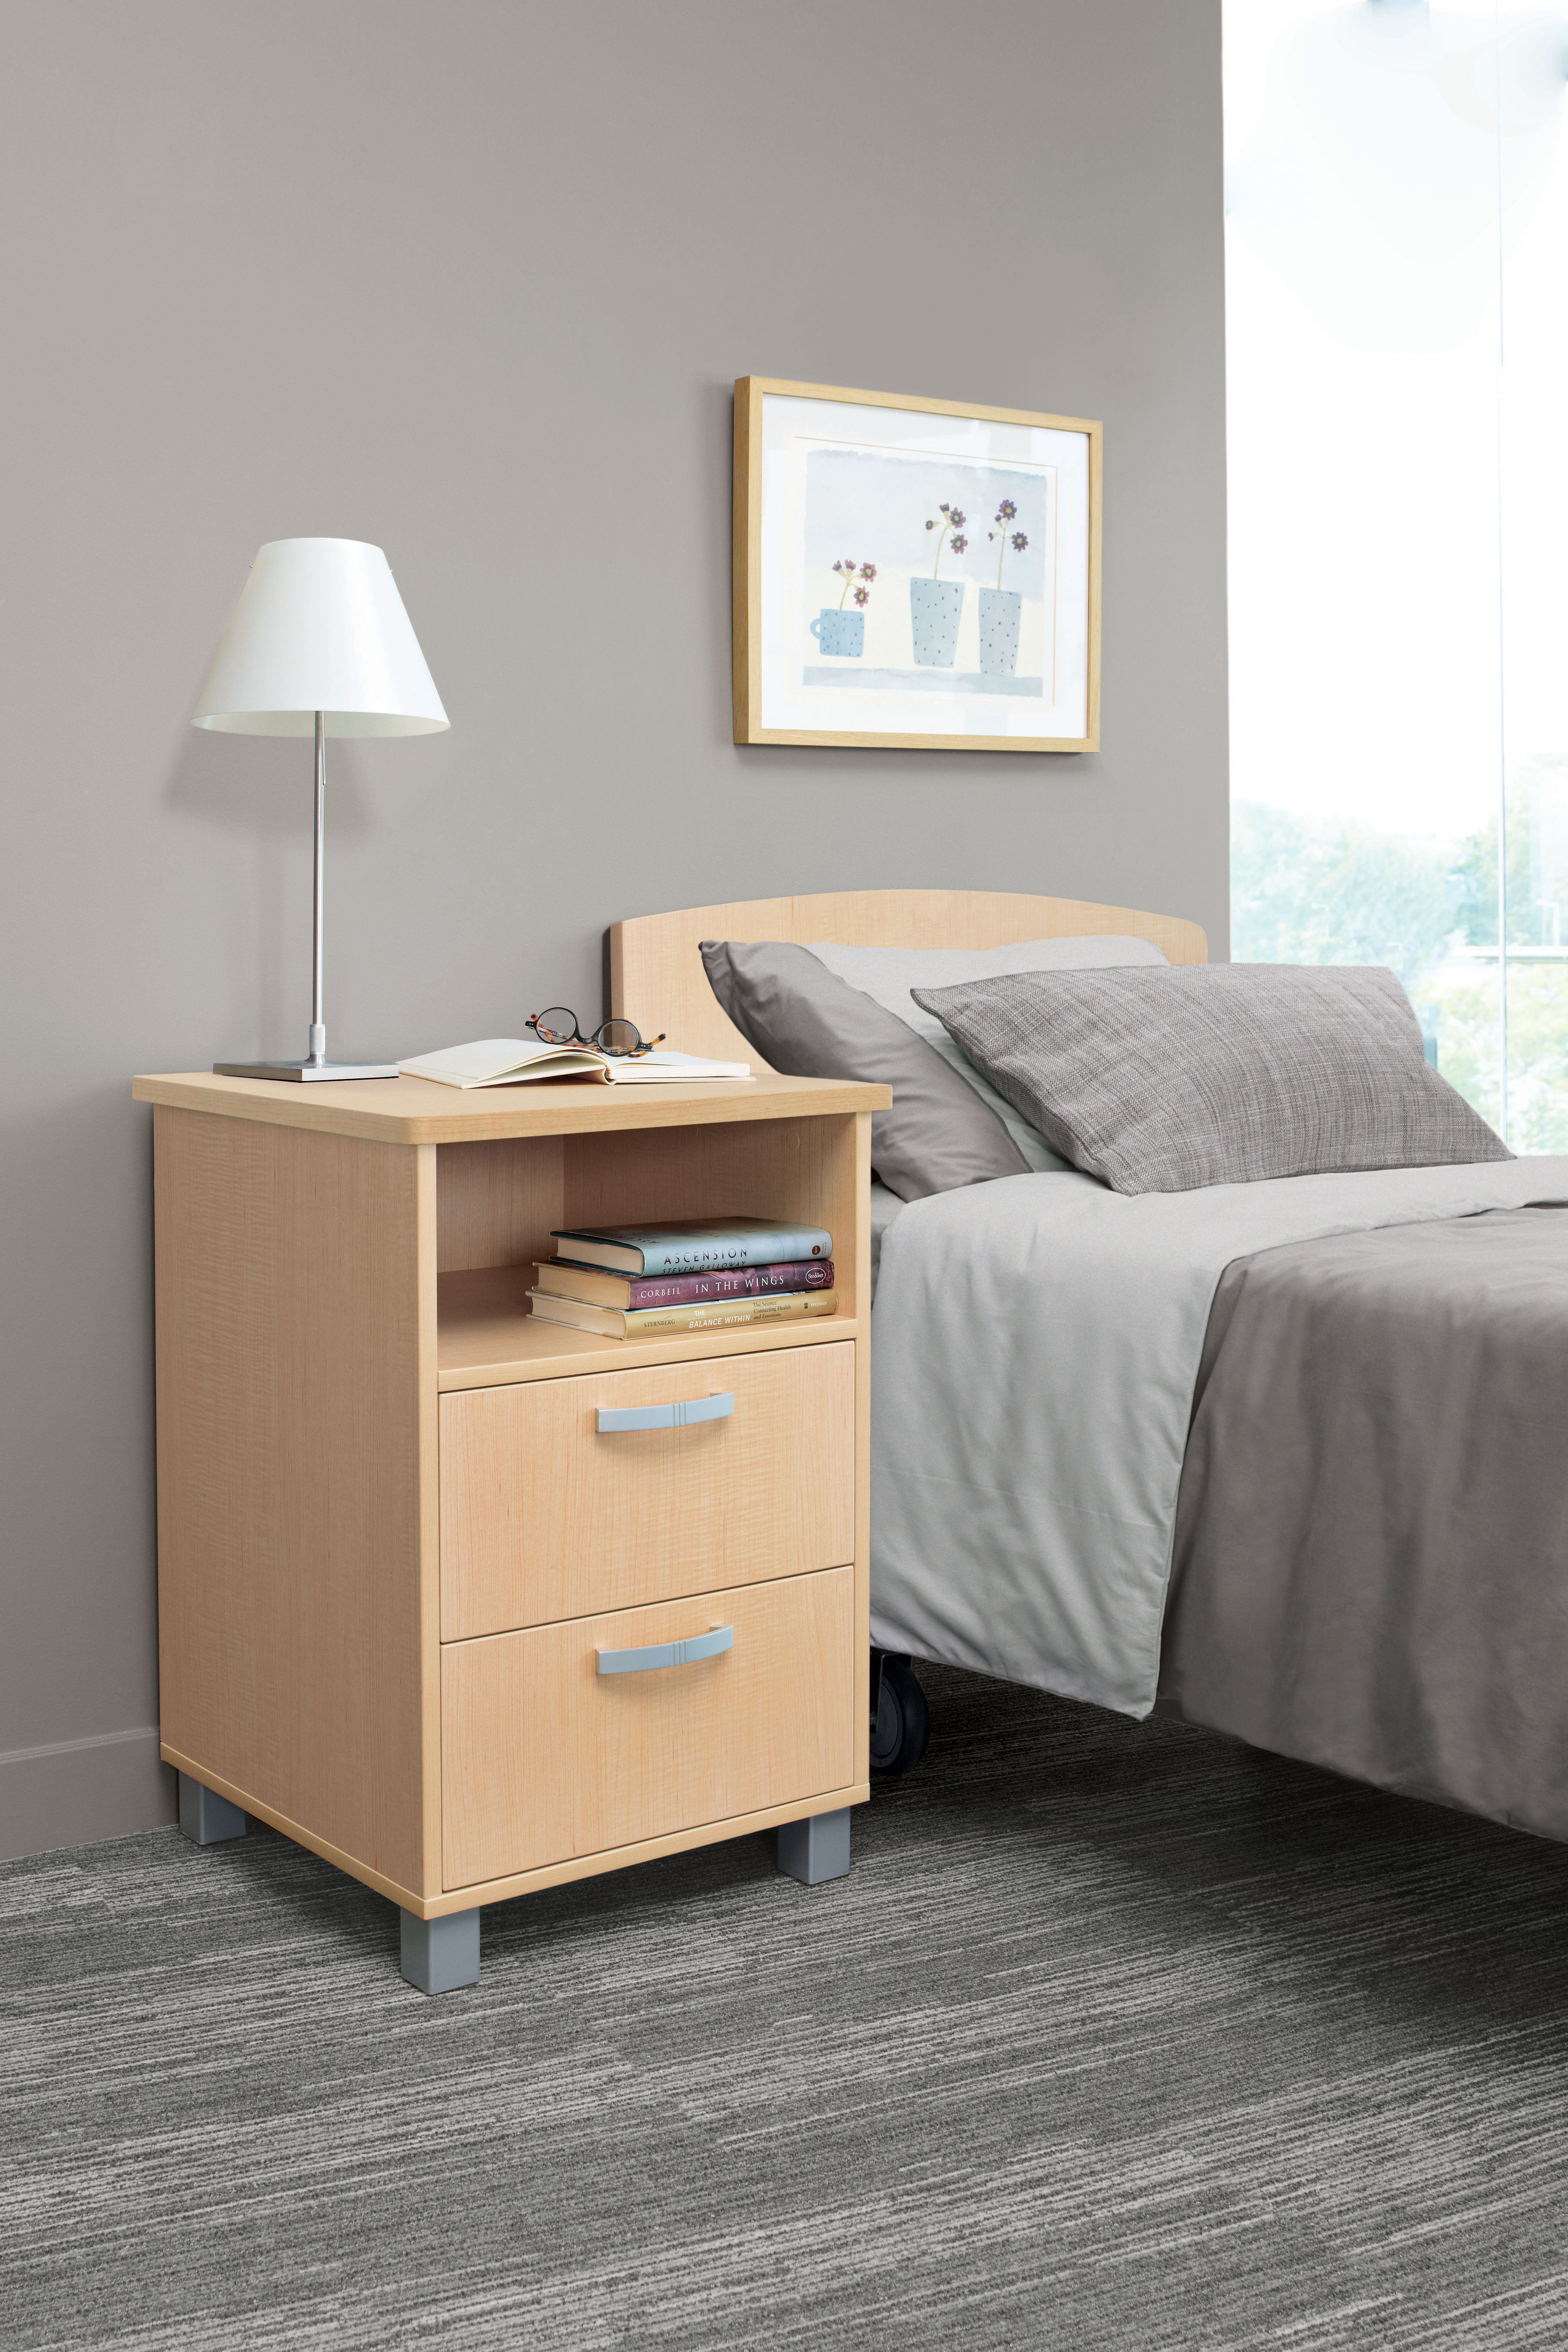 Global Furniture Group, Aldon™ offers an affordable and personalized solution for patient and resident room furniture.